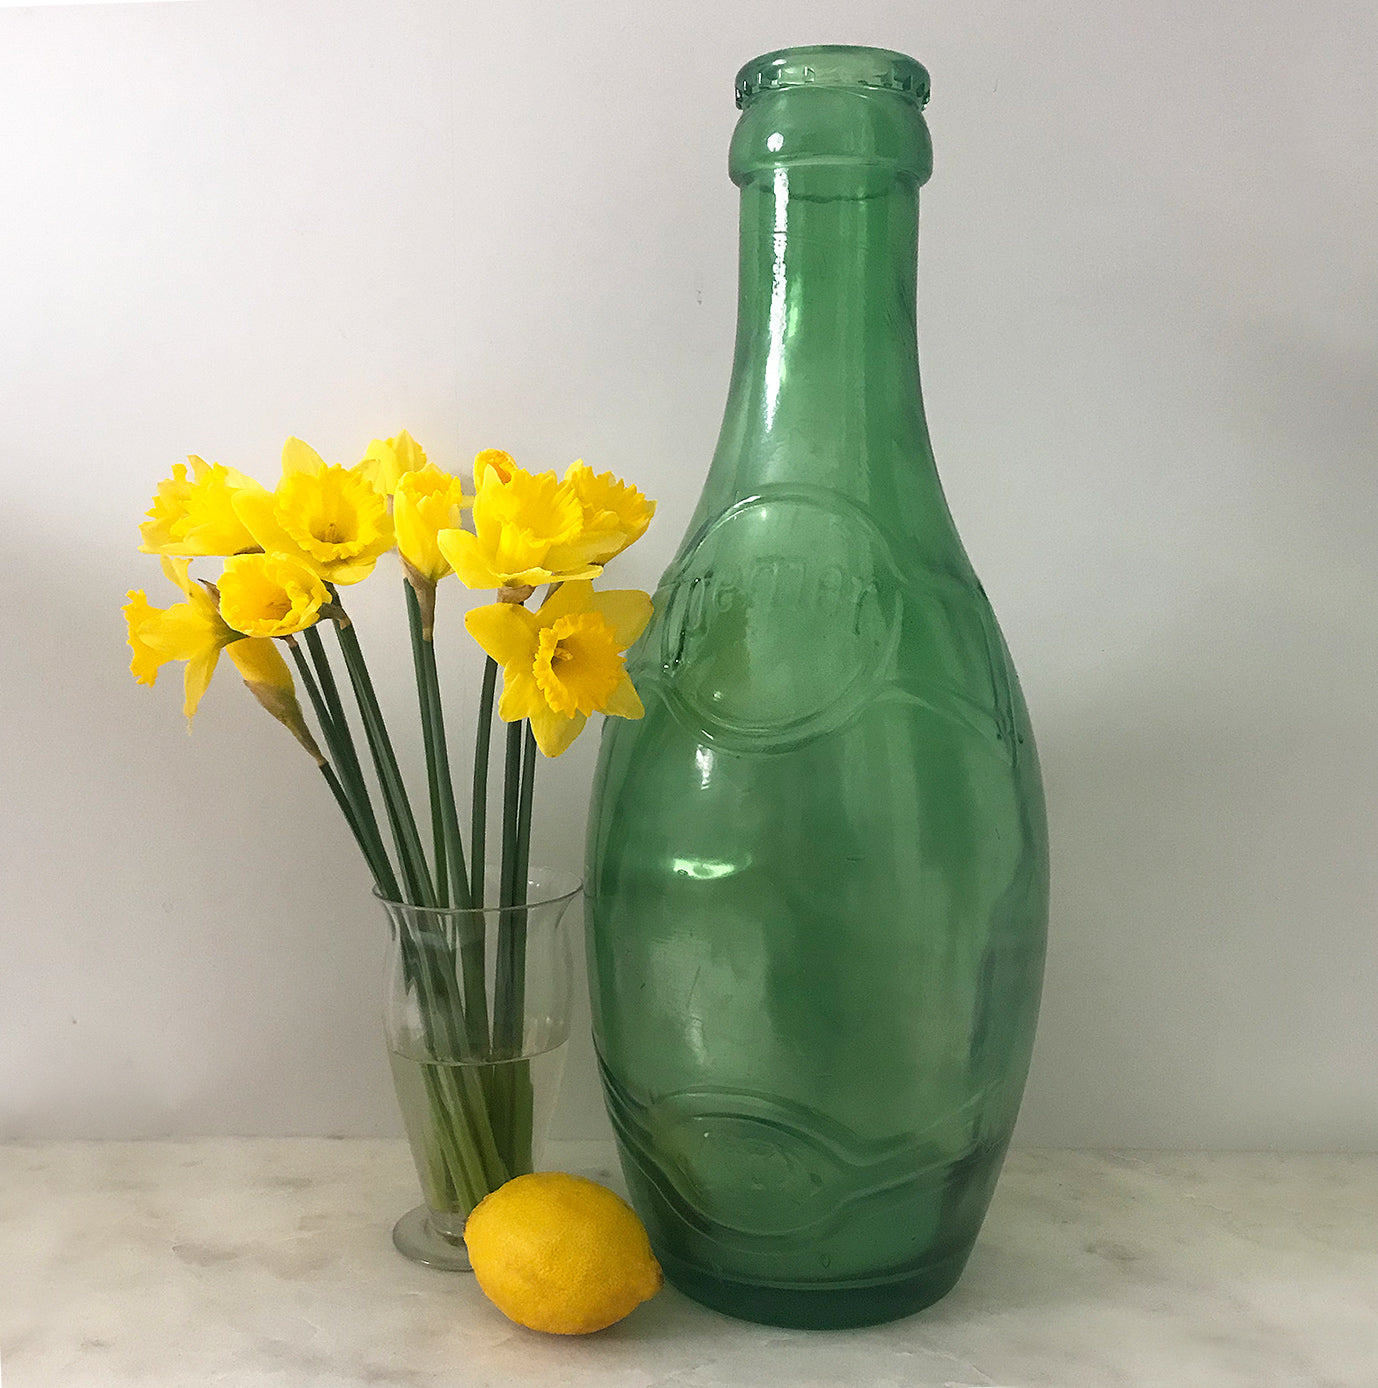 Huge, great big Perrier Glass Advertising Bottle measuring a whopping 51cm tall! Great decorators piece or somewhere cool to keep your cash - SHOP NOW - www.intovintage.co.uk